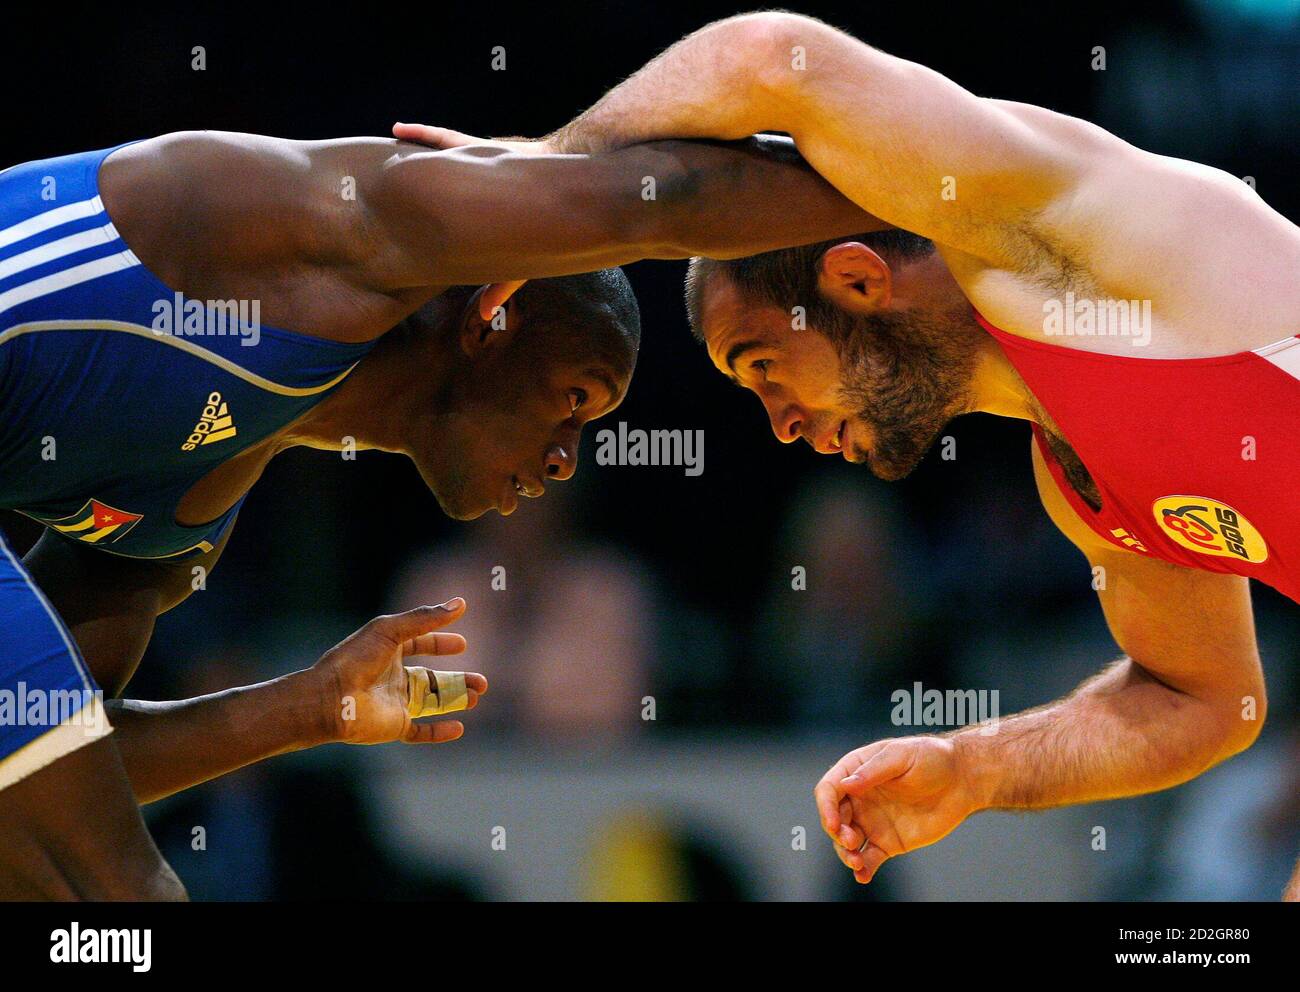 Geandri Garzon of Cuba (L) challenges Albert Batyrov of Bulgaria in the  men's 66 kg free-style qualification round during the World Wrestling  Championships 2009 in Herning September 21, 2009. REUTERS/Bob Strong  (DENMARK